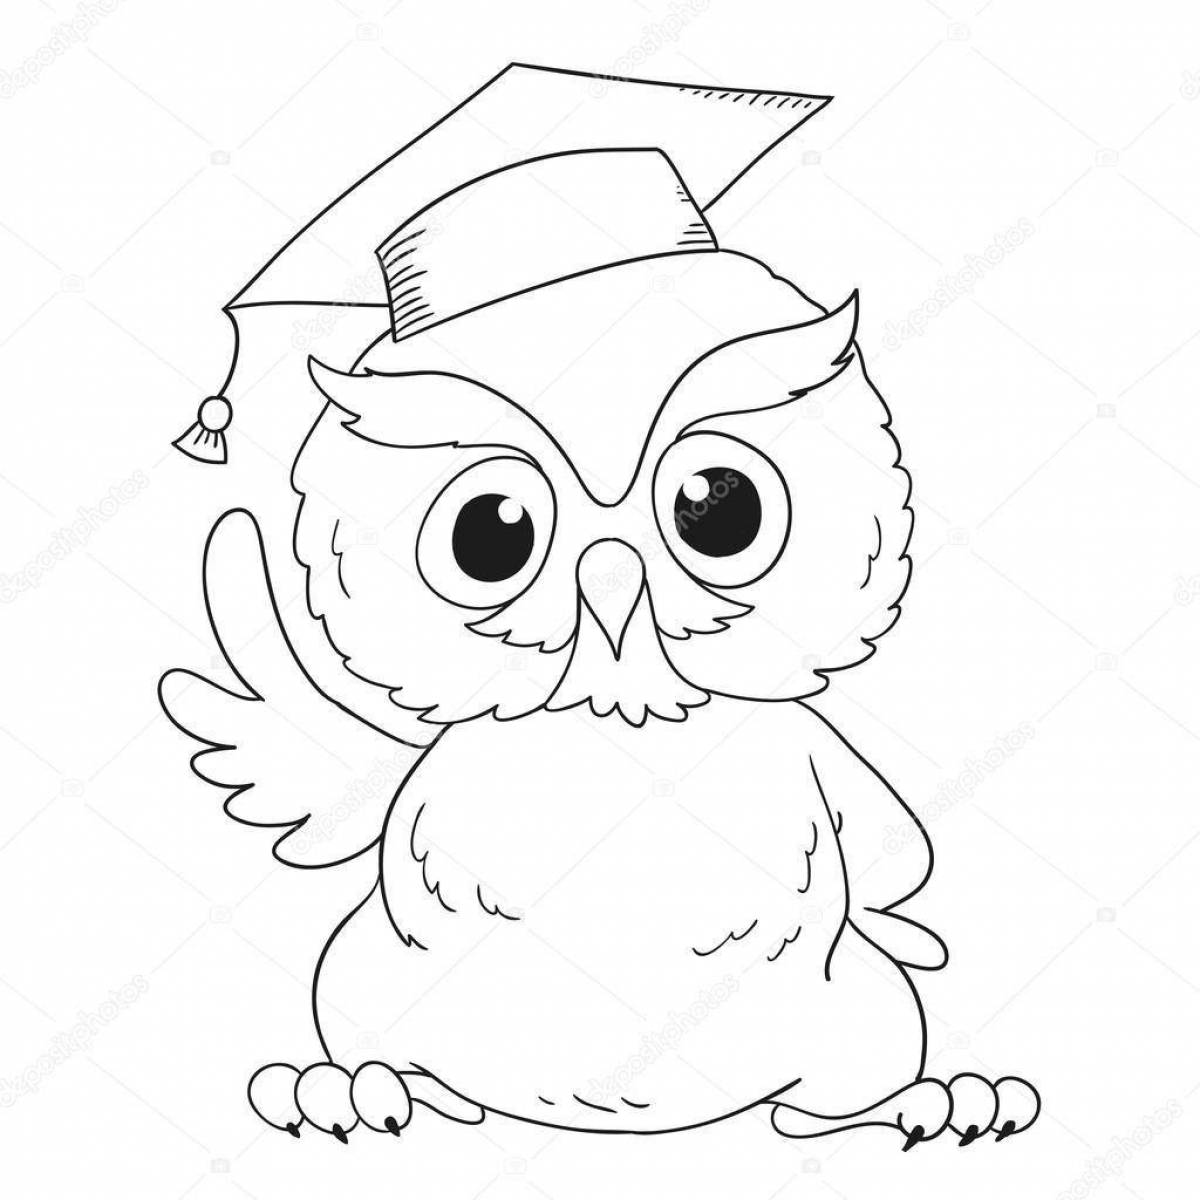 Crazy science owl coloring book